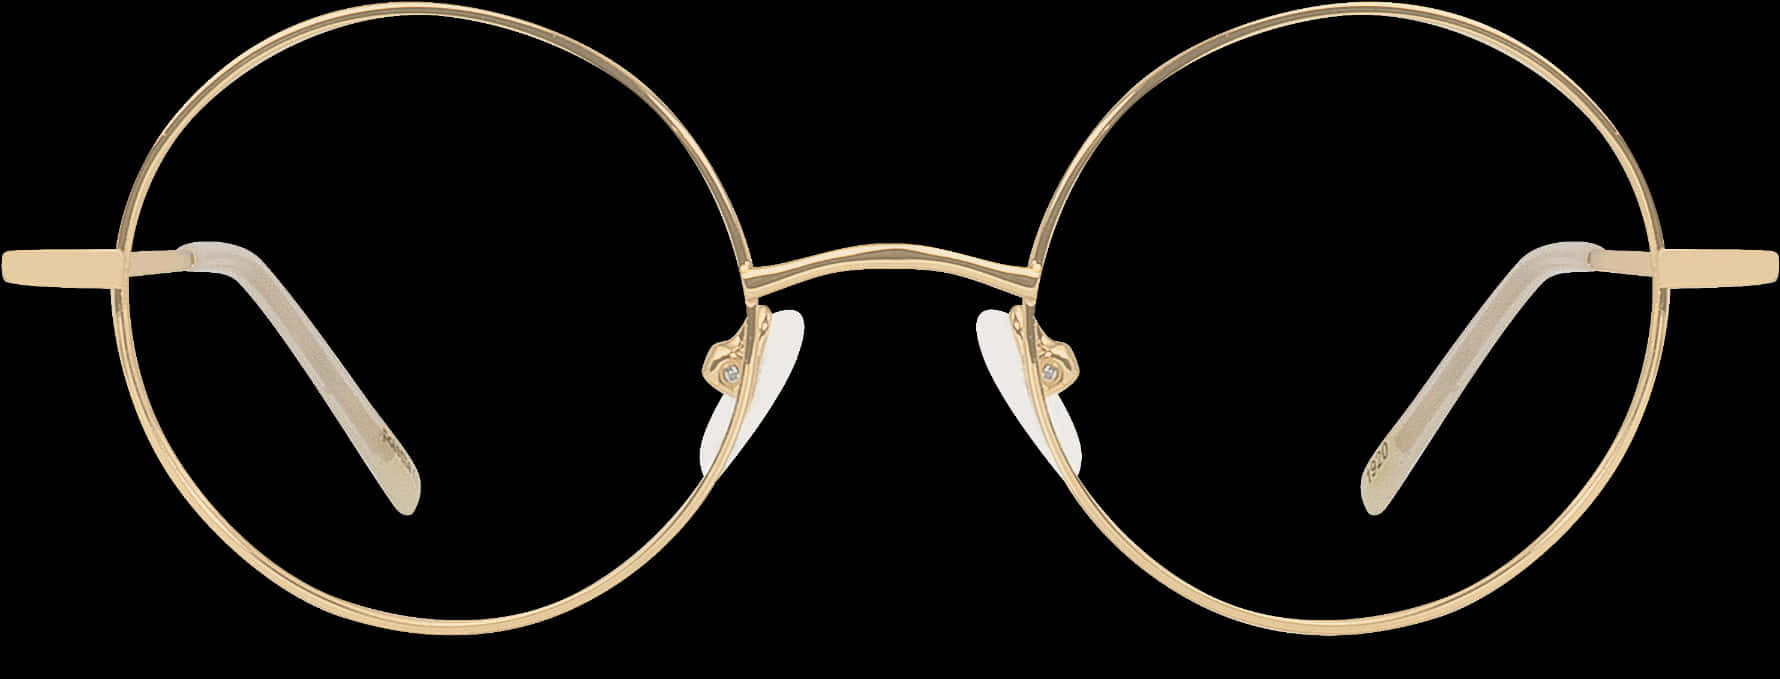 A Pair Of Gold Glasses